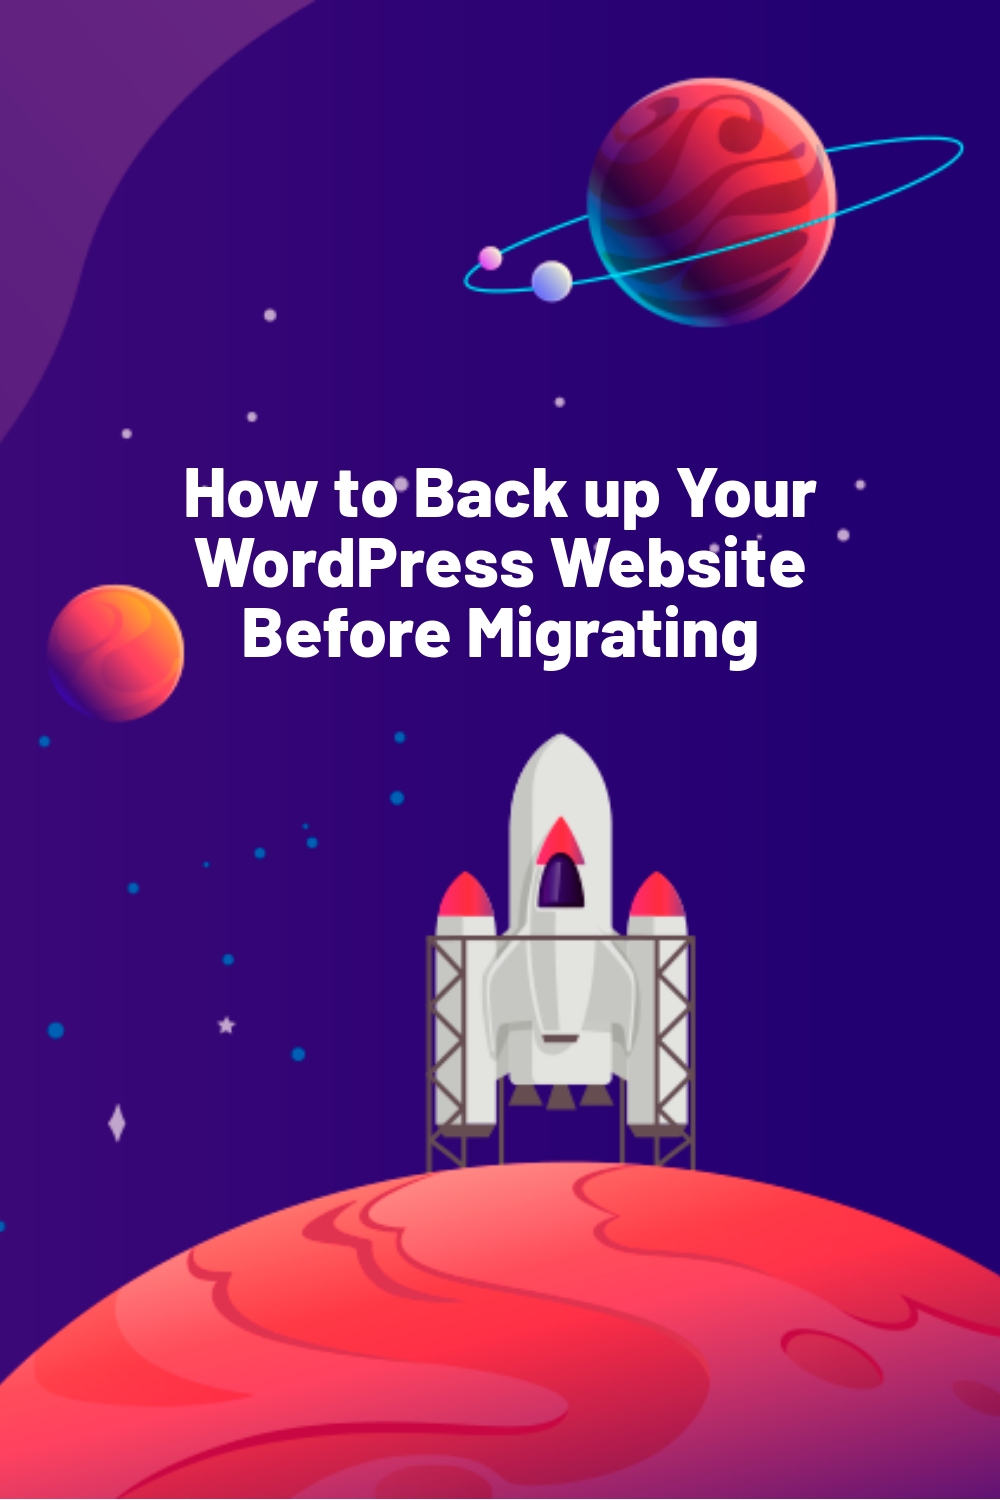 How to Back up Your WordPress Website Before Migrating